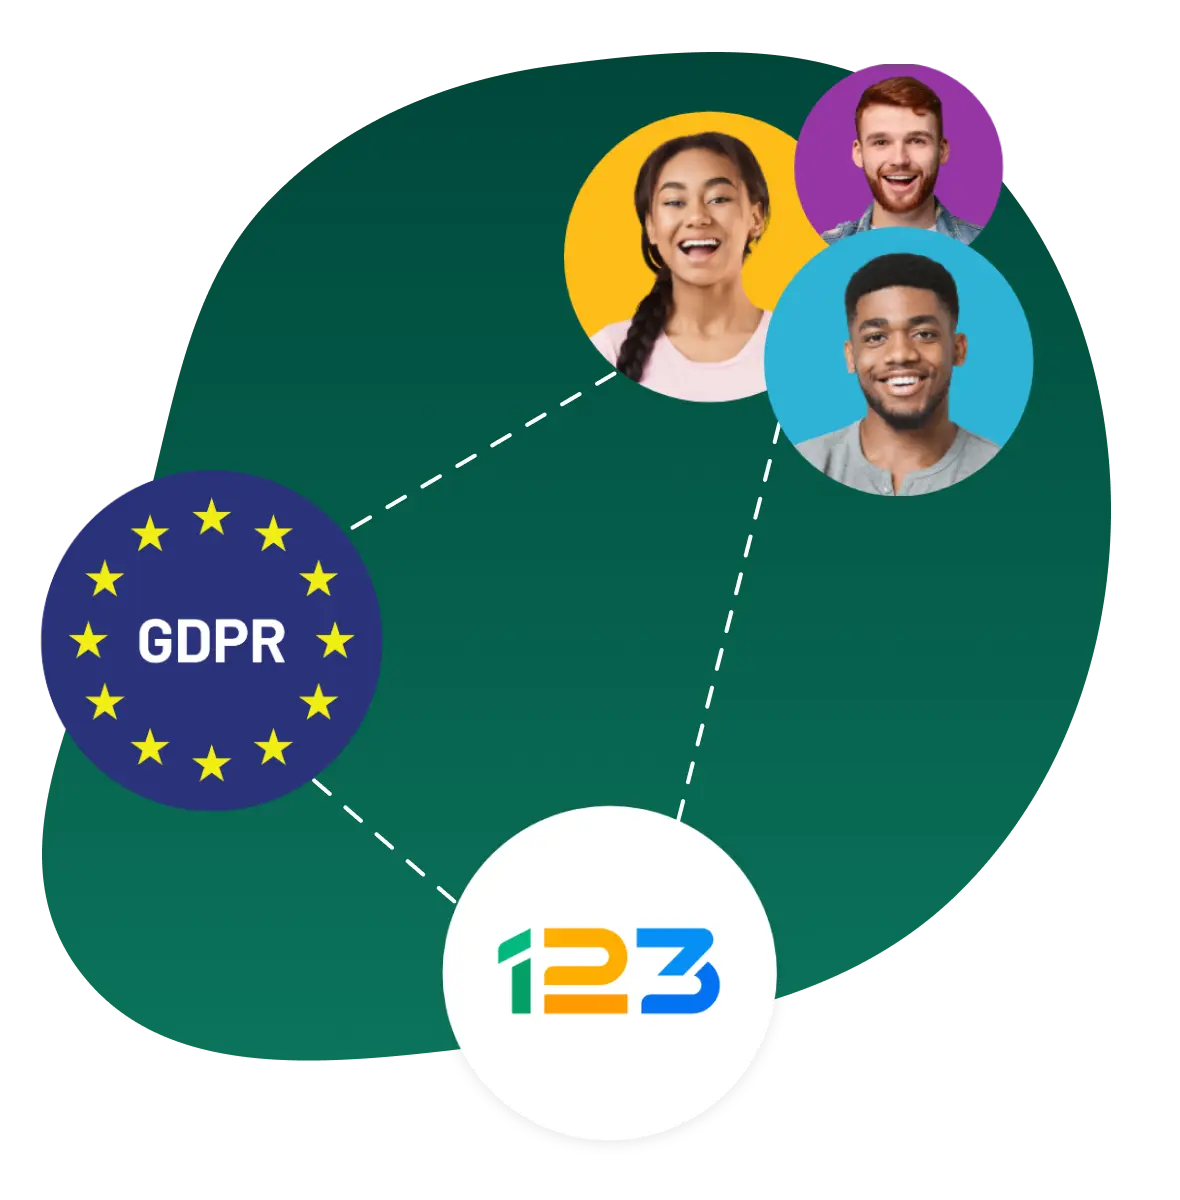 Image showing the impact of GDPR on Customers